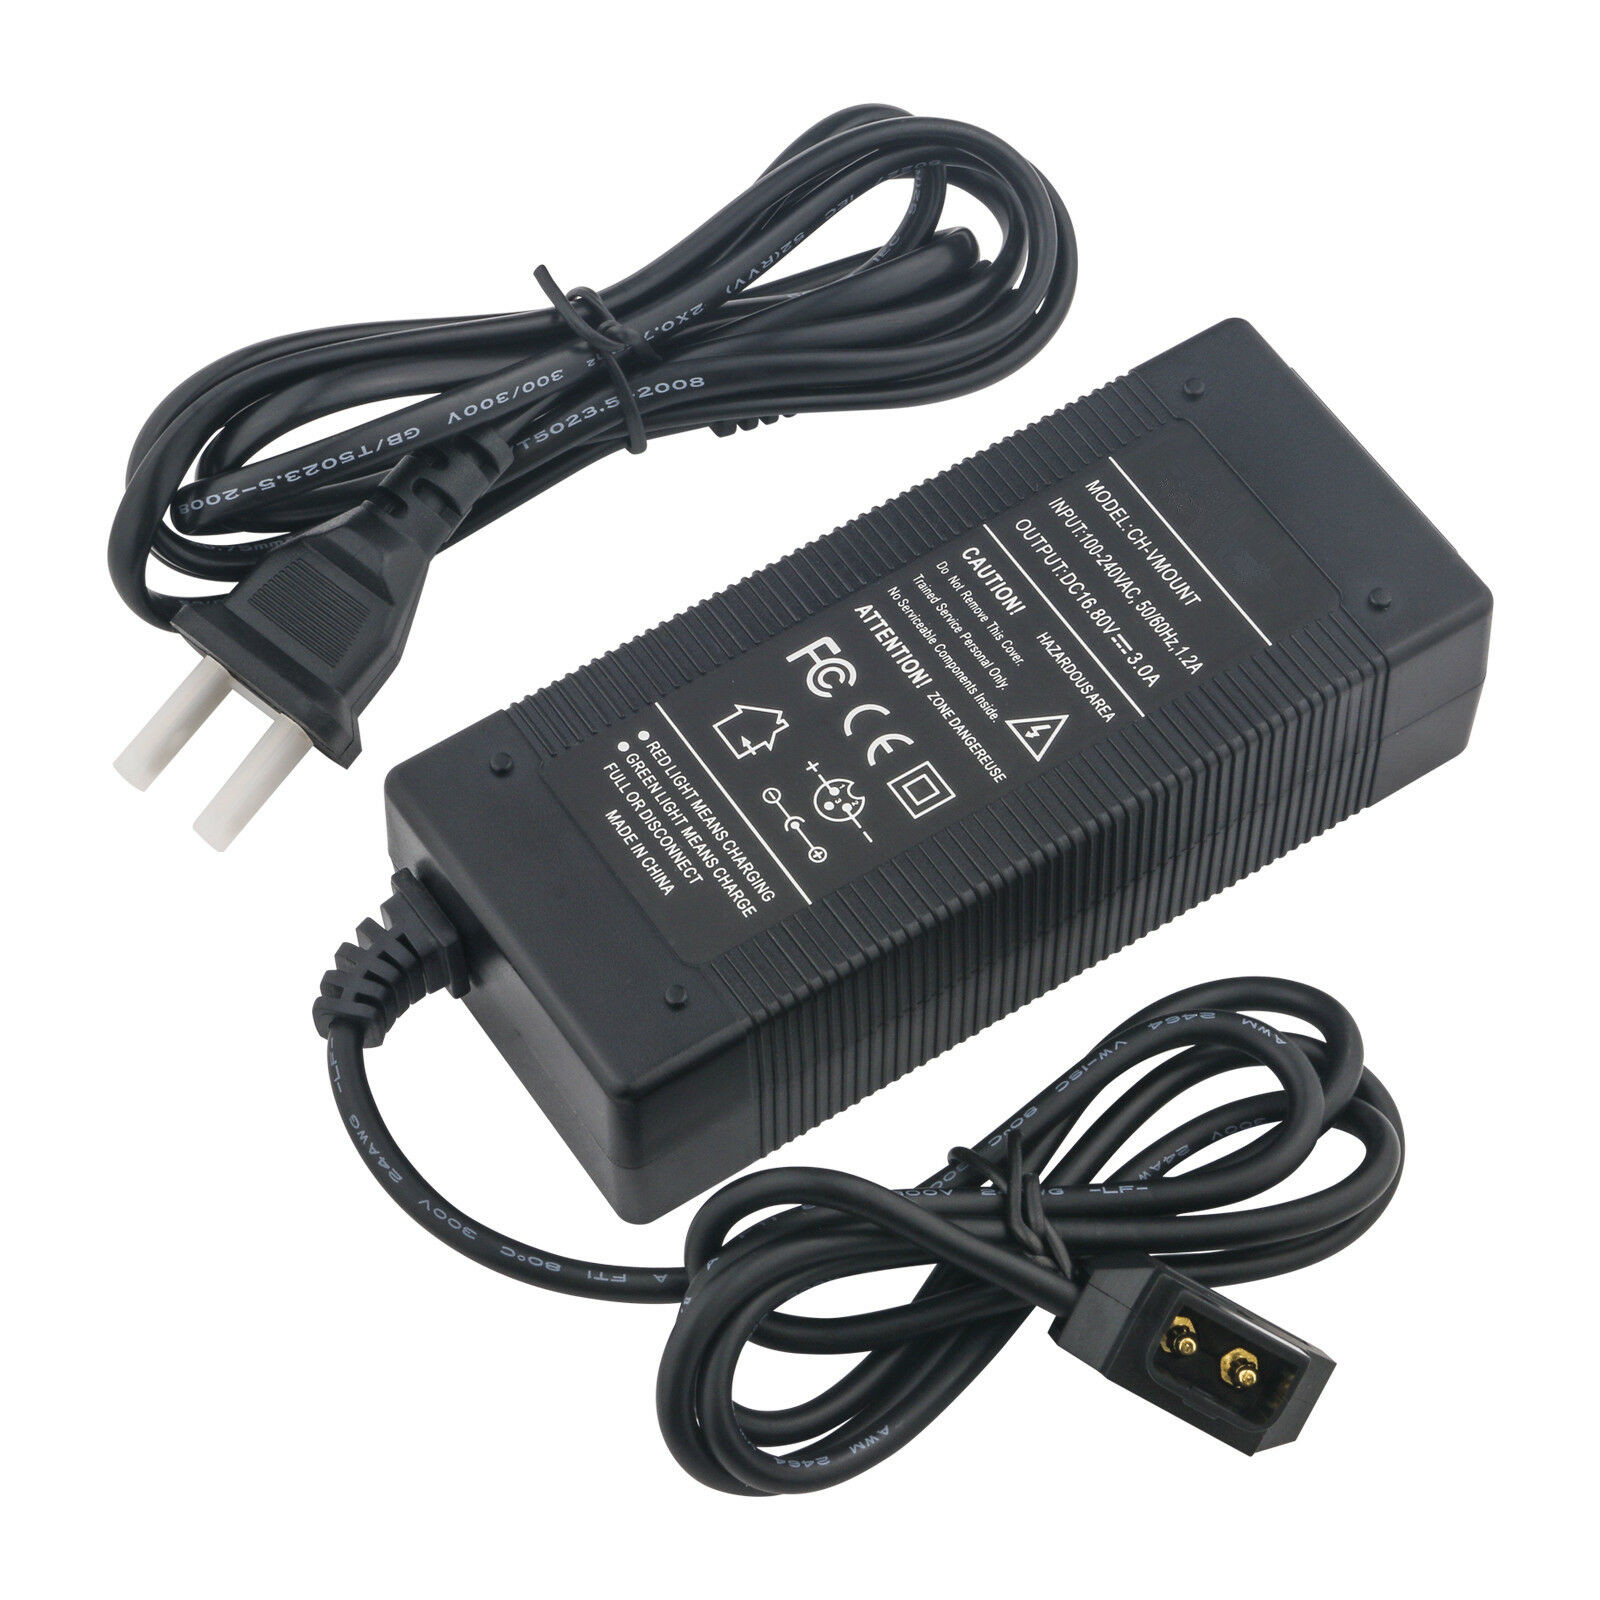 SONY PDW-F330 battery charger